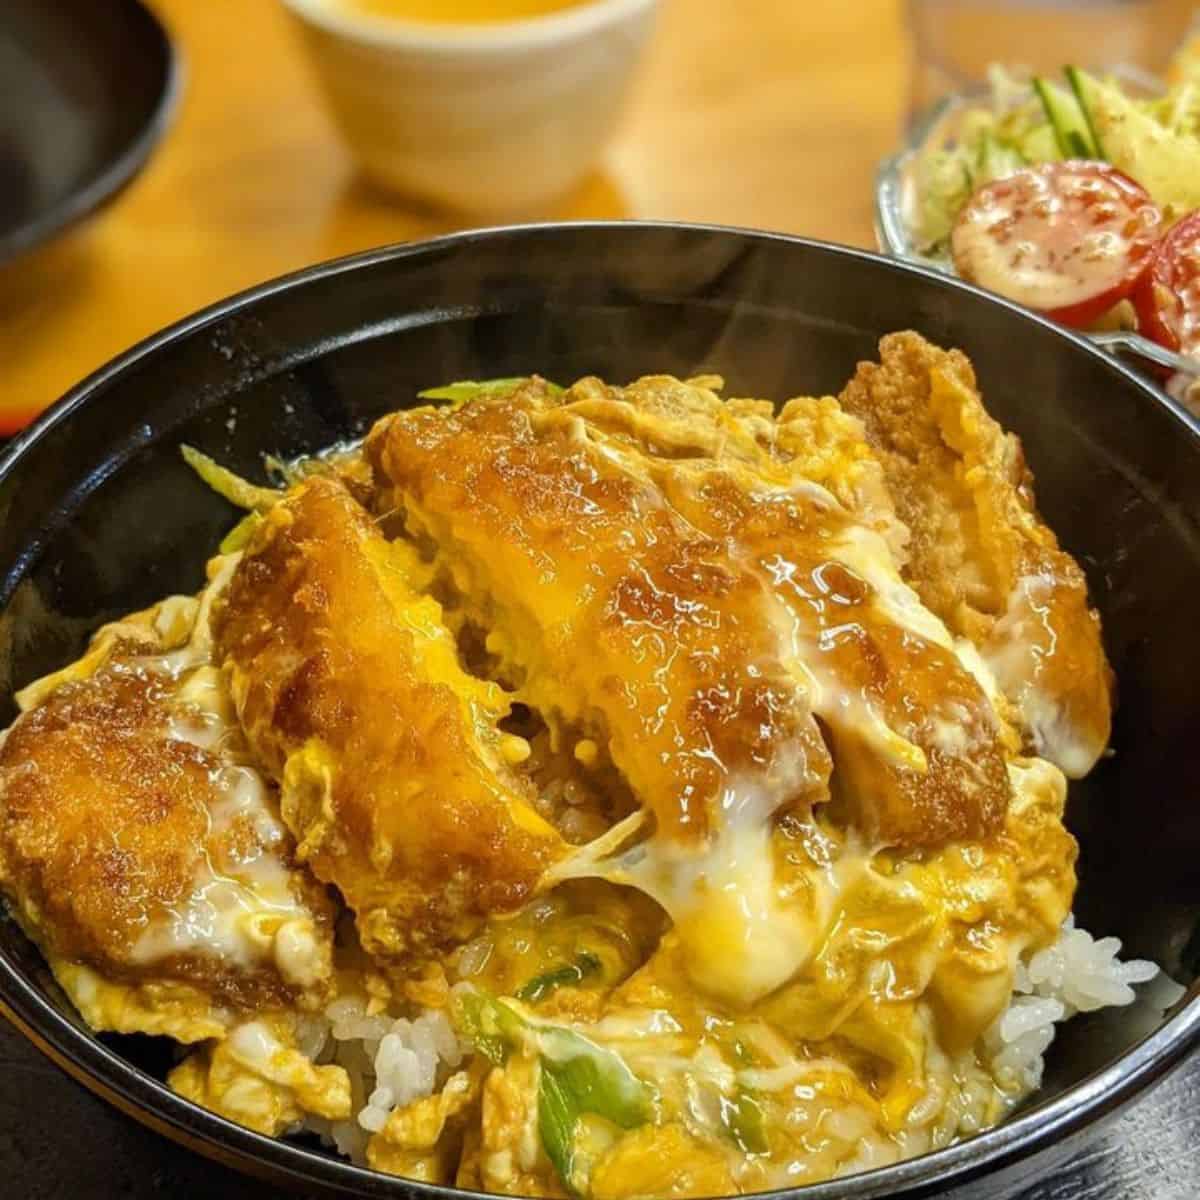 Katsudon in a black bowl with vegetable salad on another bowl